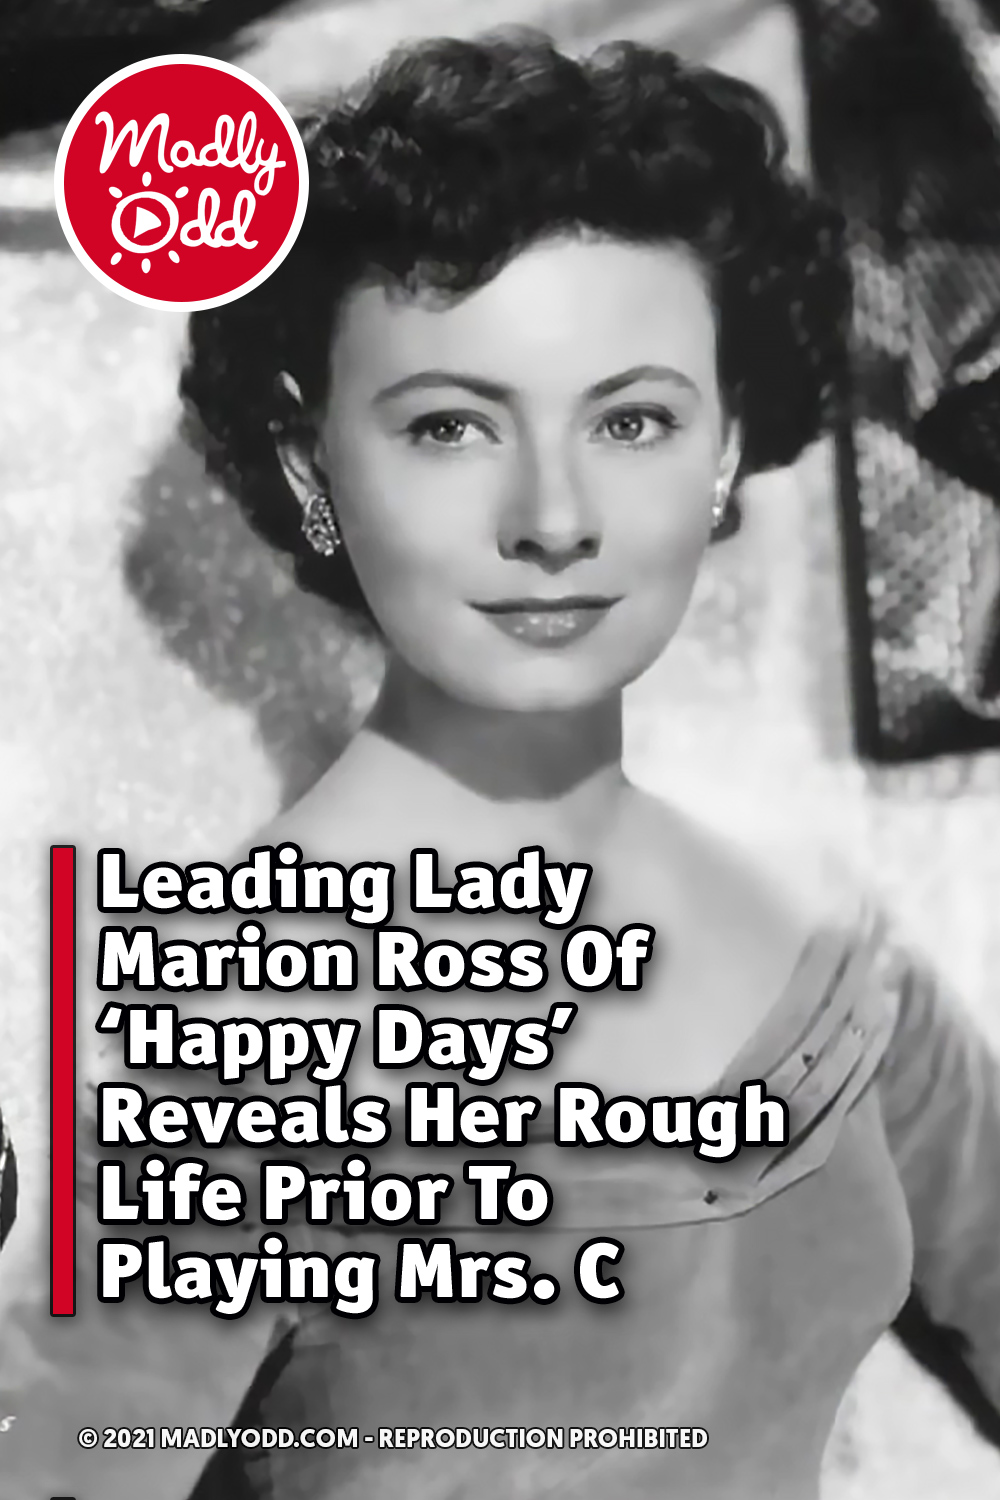 Leading Lady Marion Ross Of \'Happy Days\' Reveals Her Rough Life Prior To Playing Mrs. C